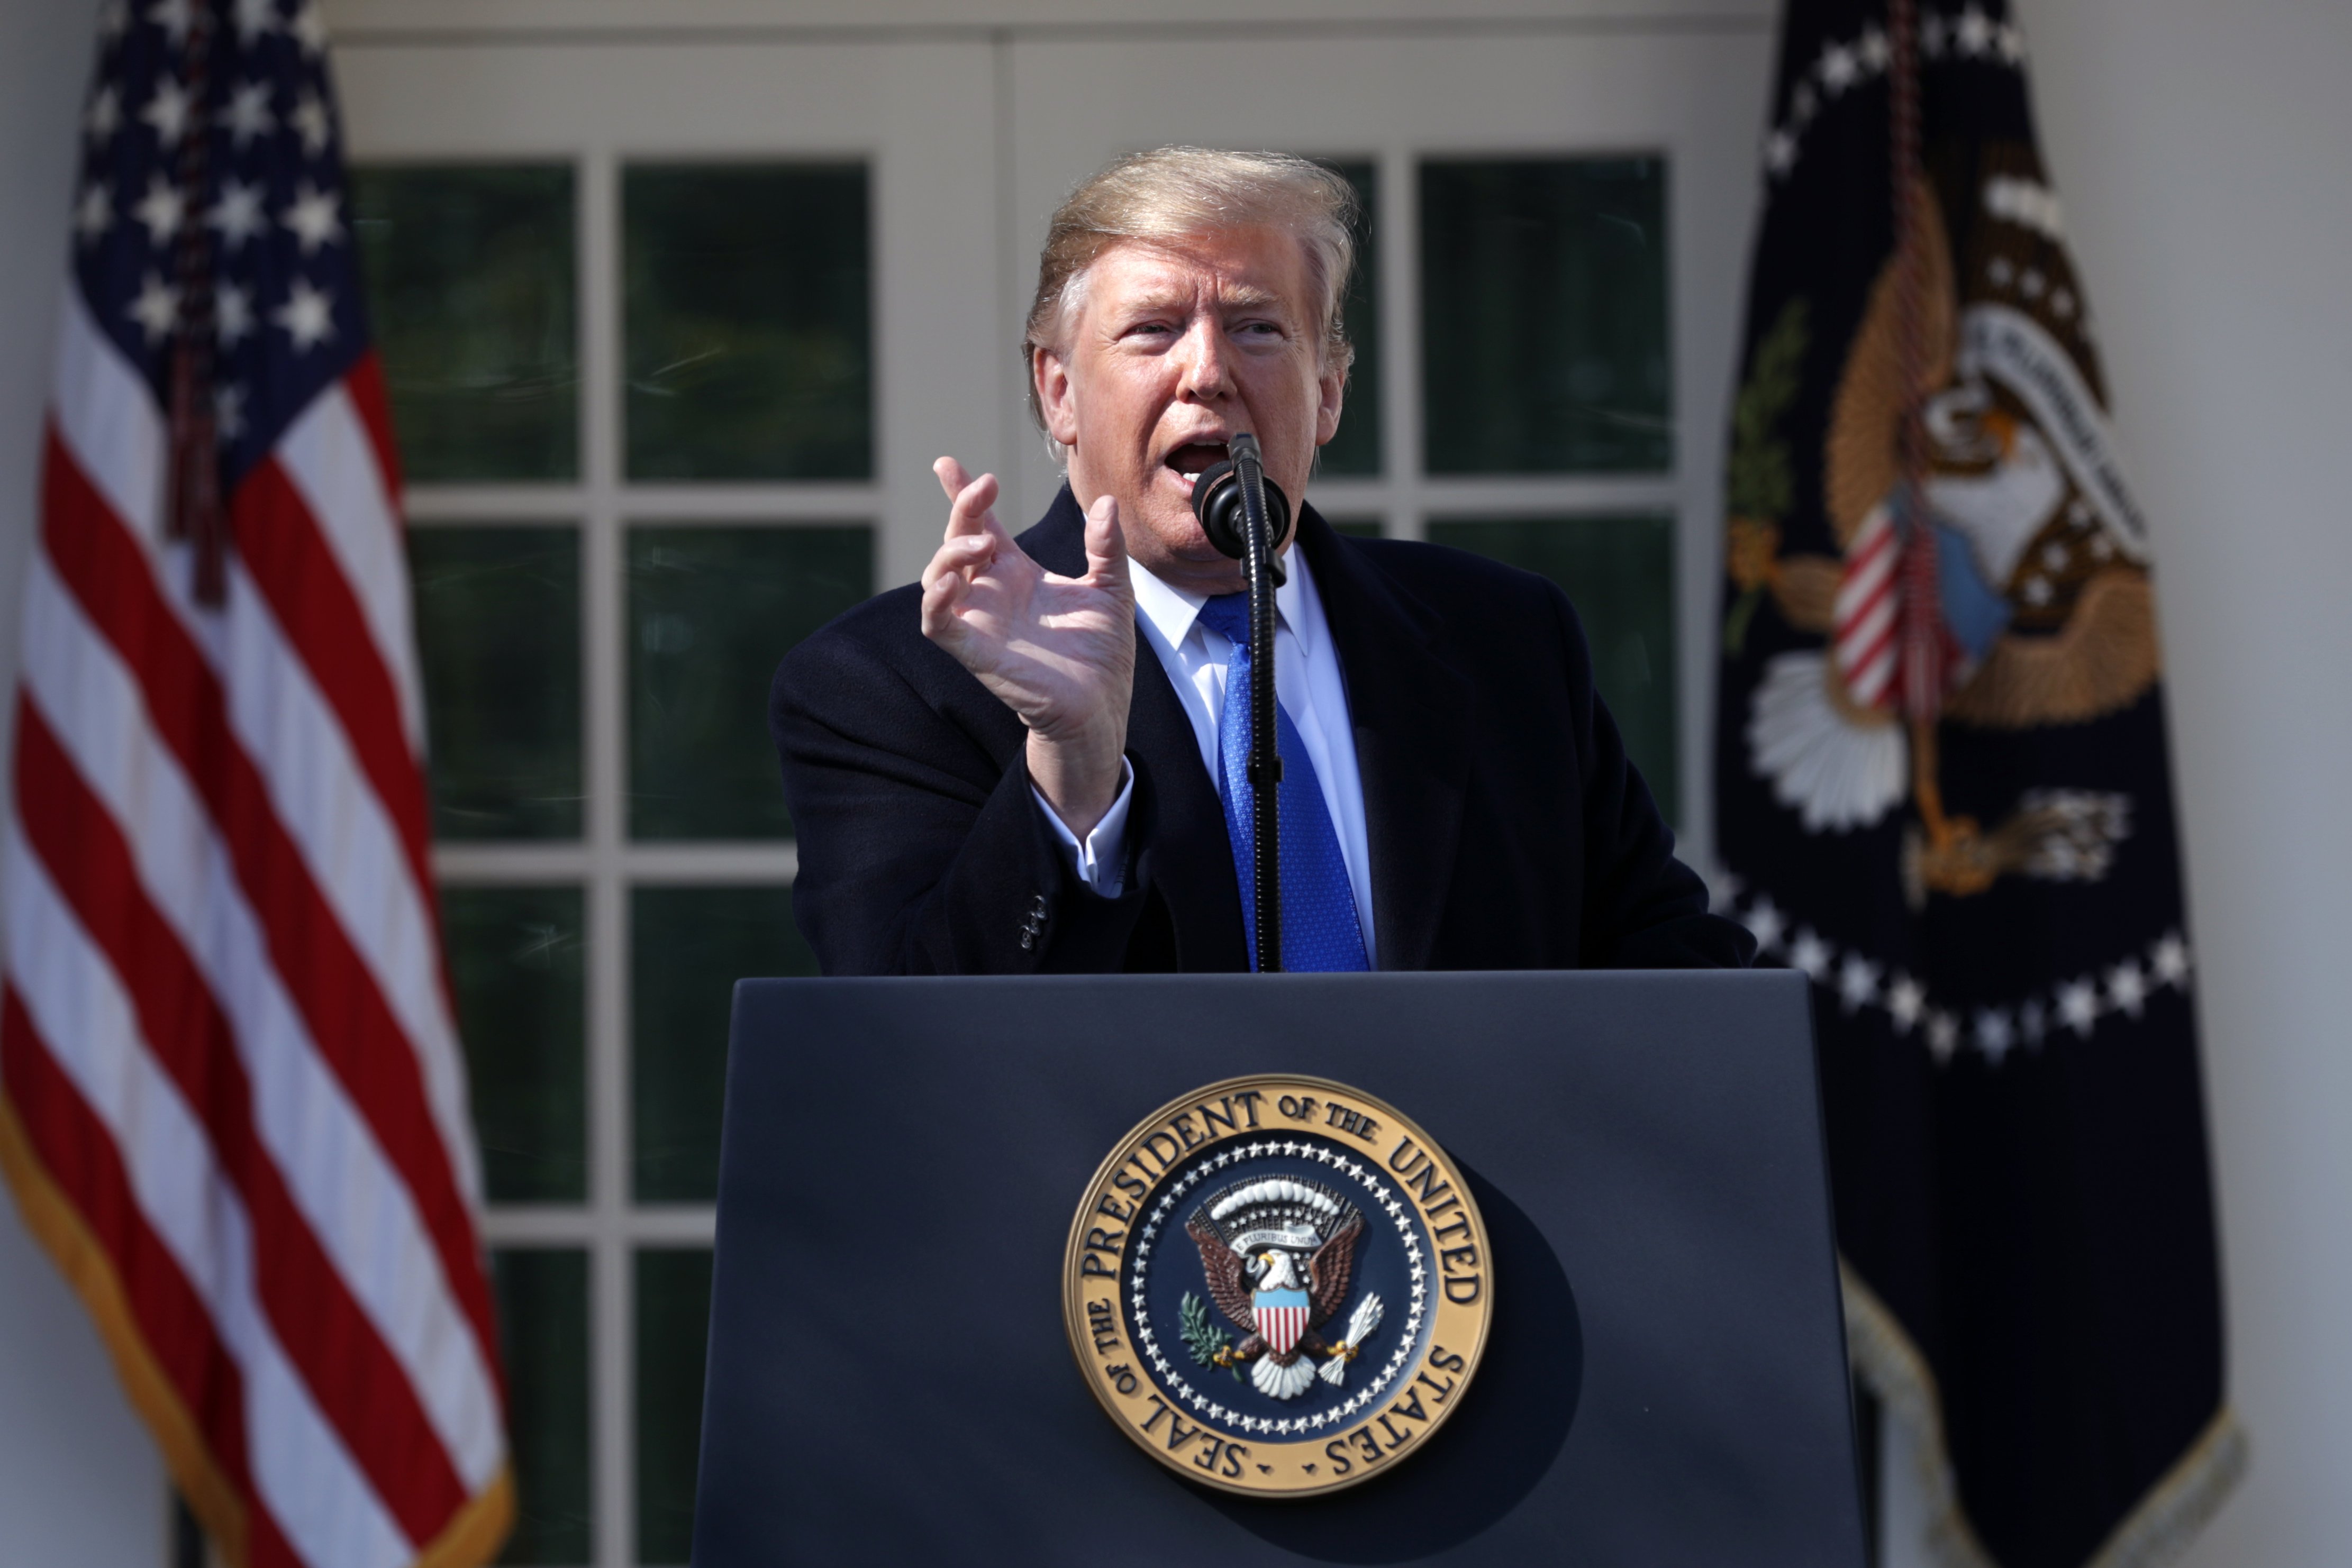 President Donald Trump delivering his national emergency declaration speech at the White House | Photo: Getty Images